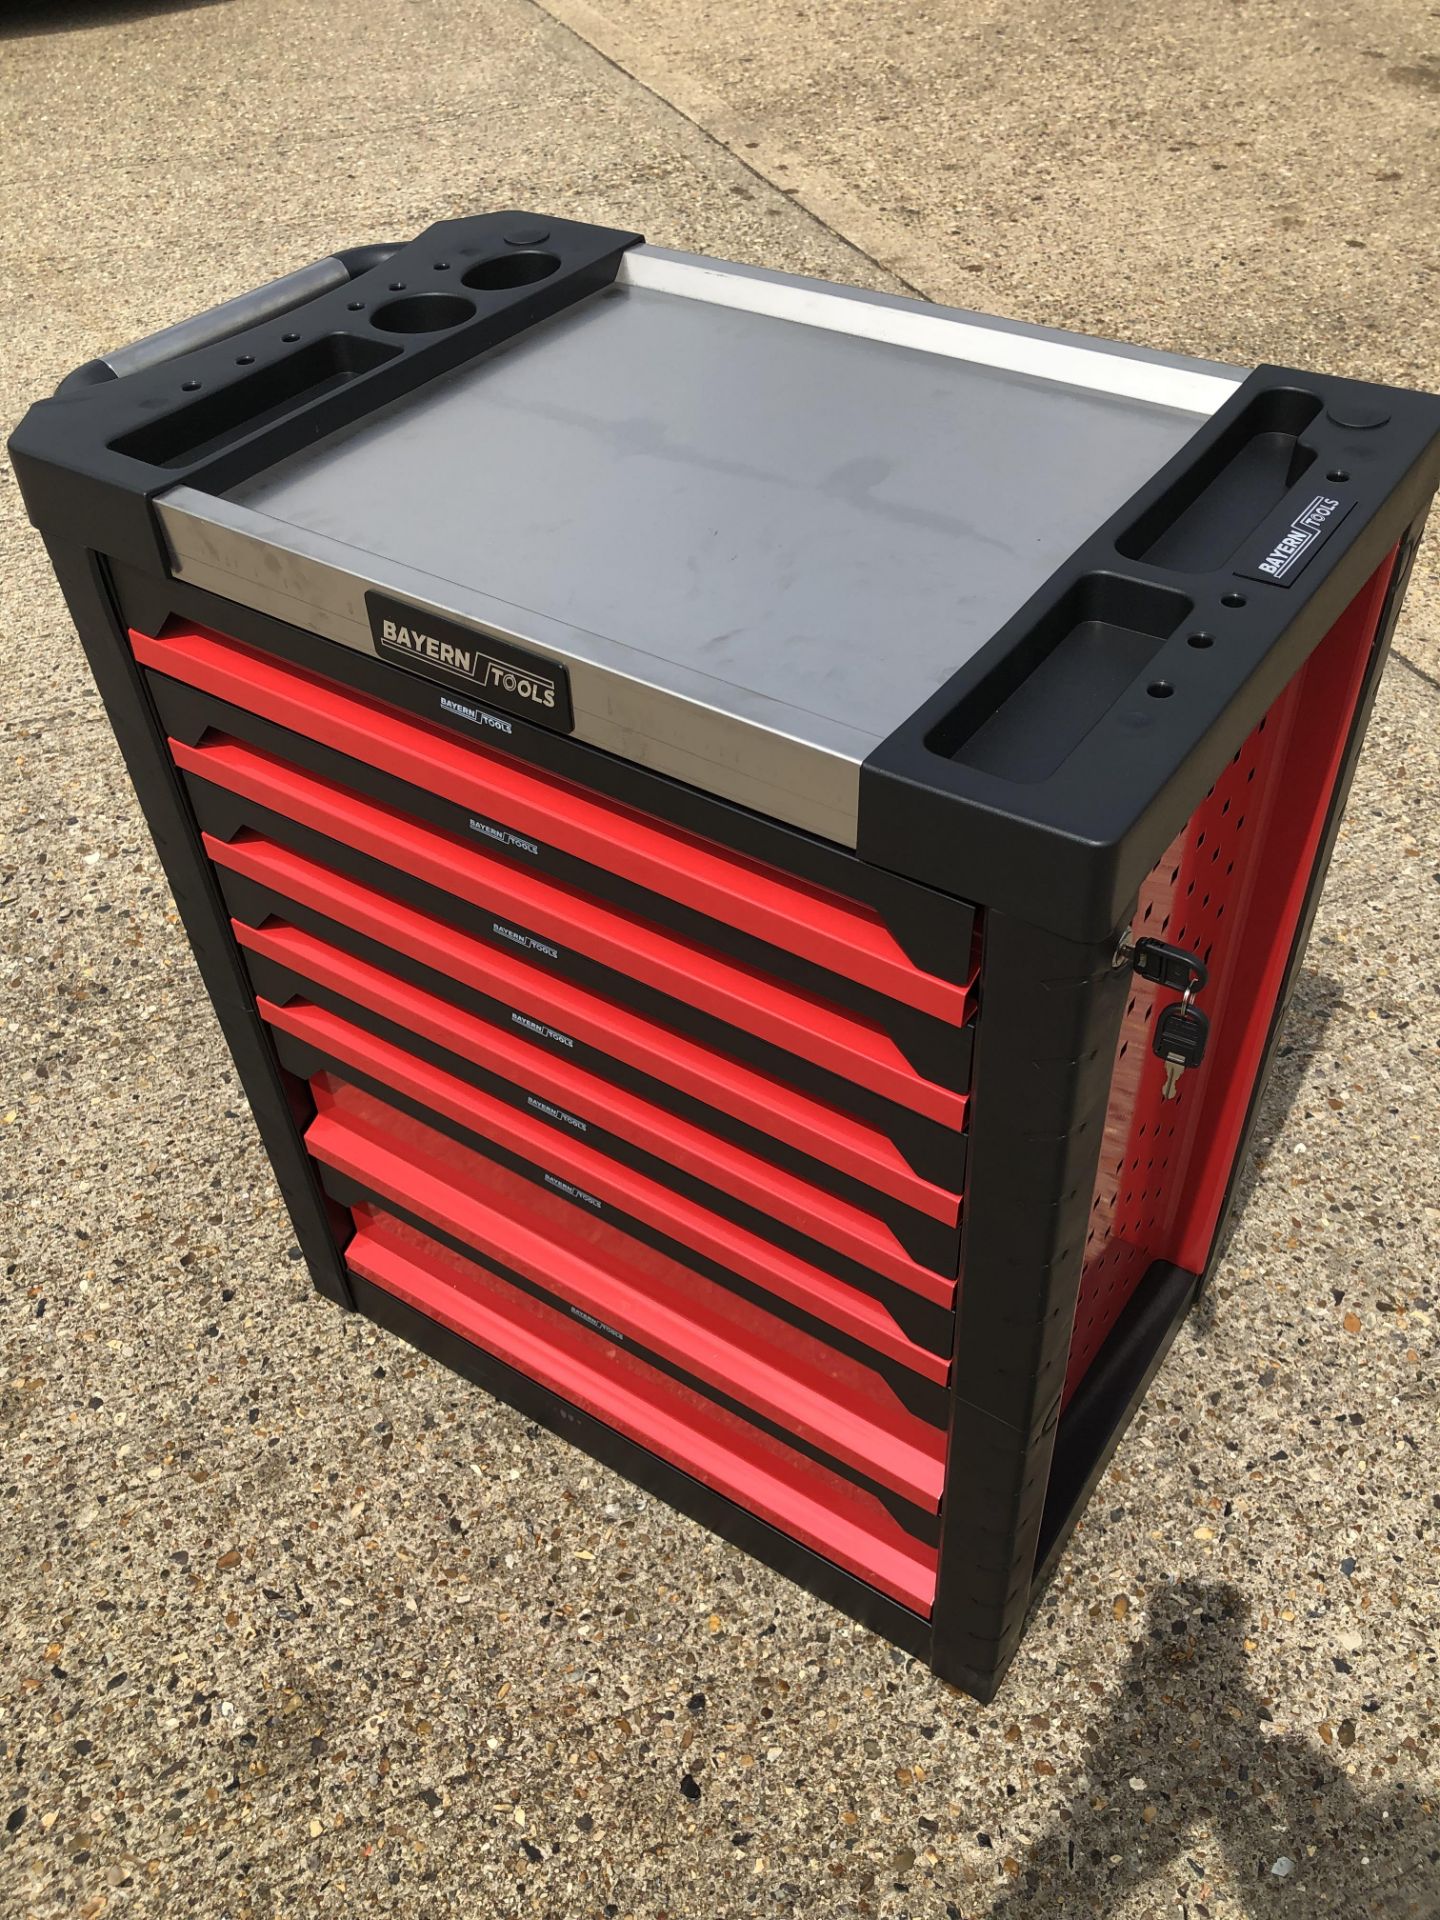 V Brand New Professional Locking Garage Tool Trolley/Cabinet (Red/Blue) with Metal Top and 7 Drawers - Image 3 of 12